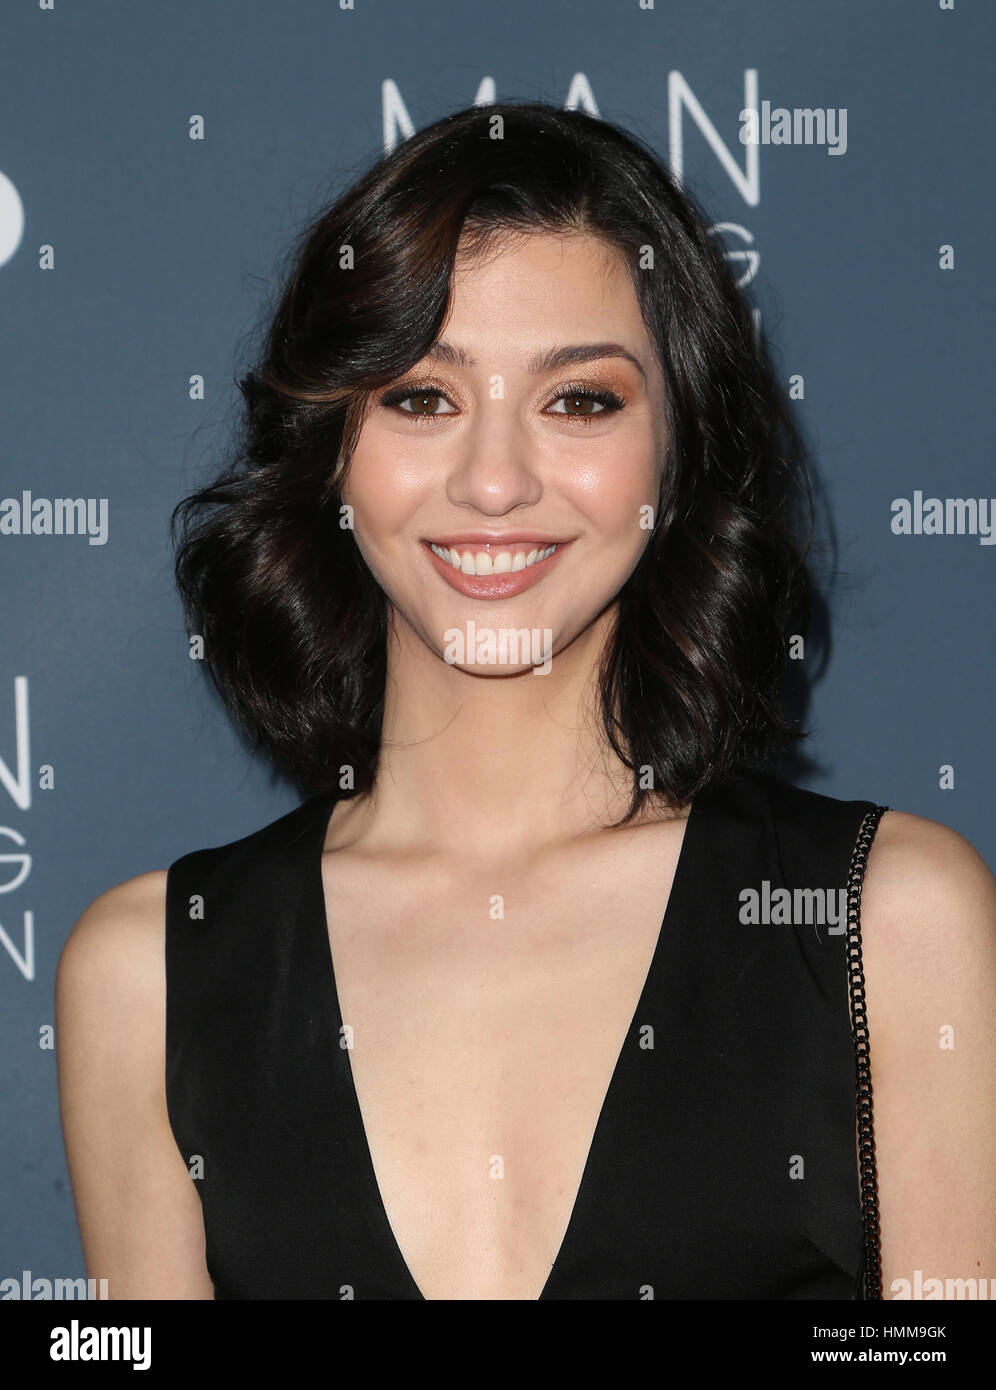 Premiere of FXX's 'It's Always Sunny In Philadelphia' season 12 and 'Man Seeking Woman' season 3 - Arrivals  Featuring: Katie Findlay Where: Los Angeles, California, United States When: 03 Jan 2017 Credit: FayesVision/WENN.com Stock Photo